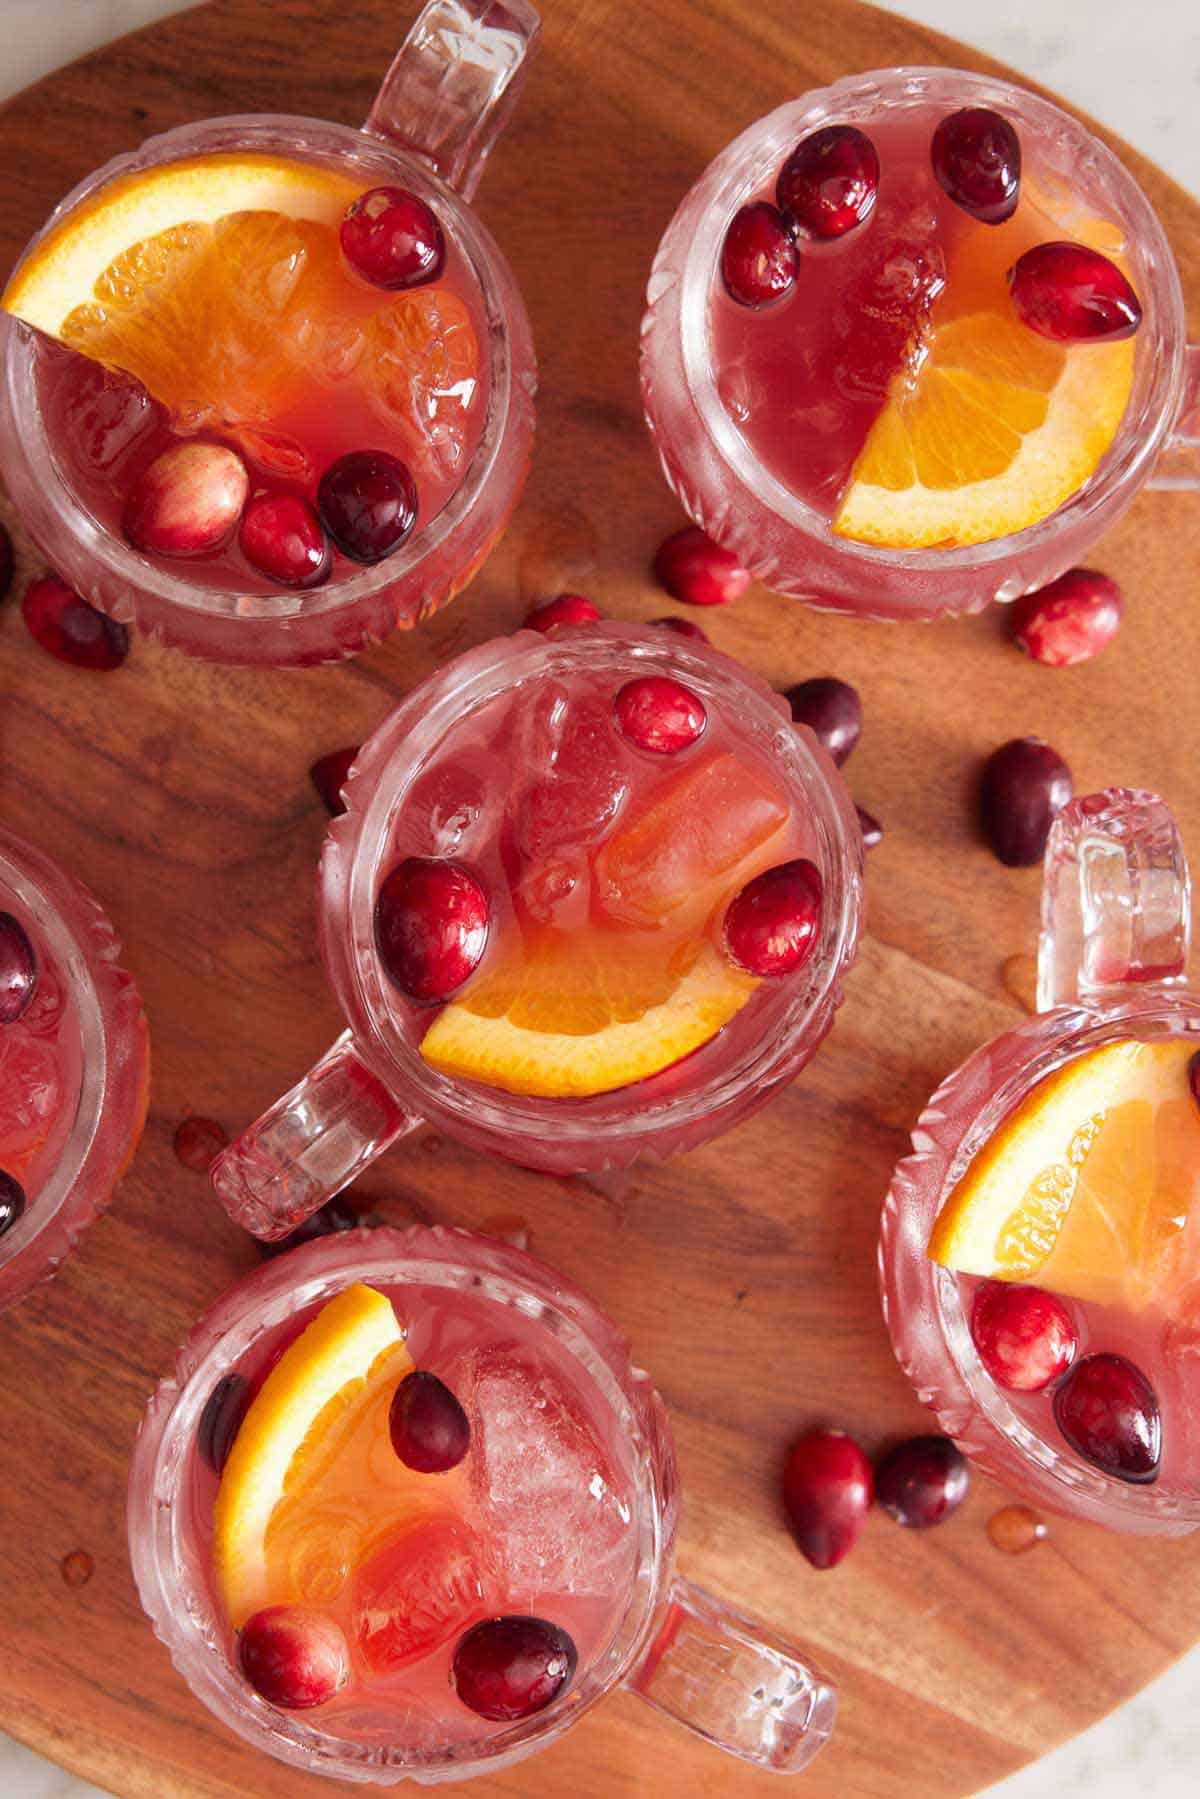 Overhead view of multiple glasses of Christmas punch with cranberries scattered around.